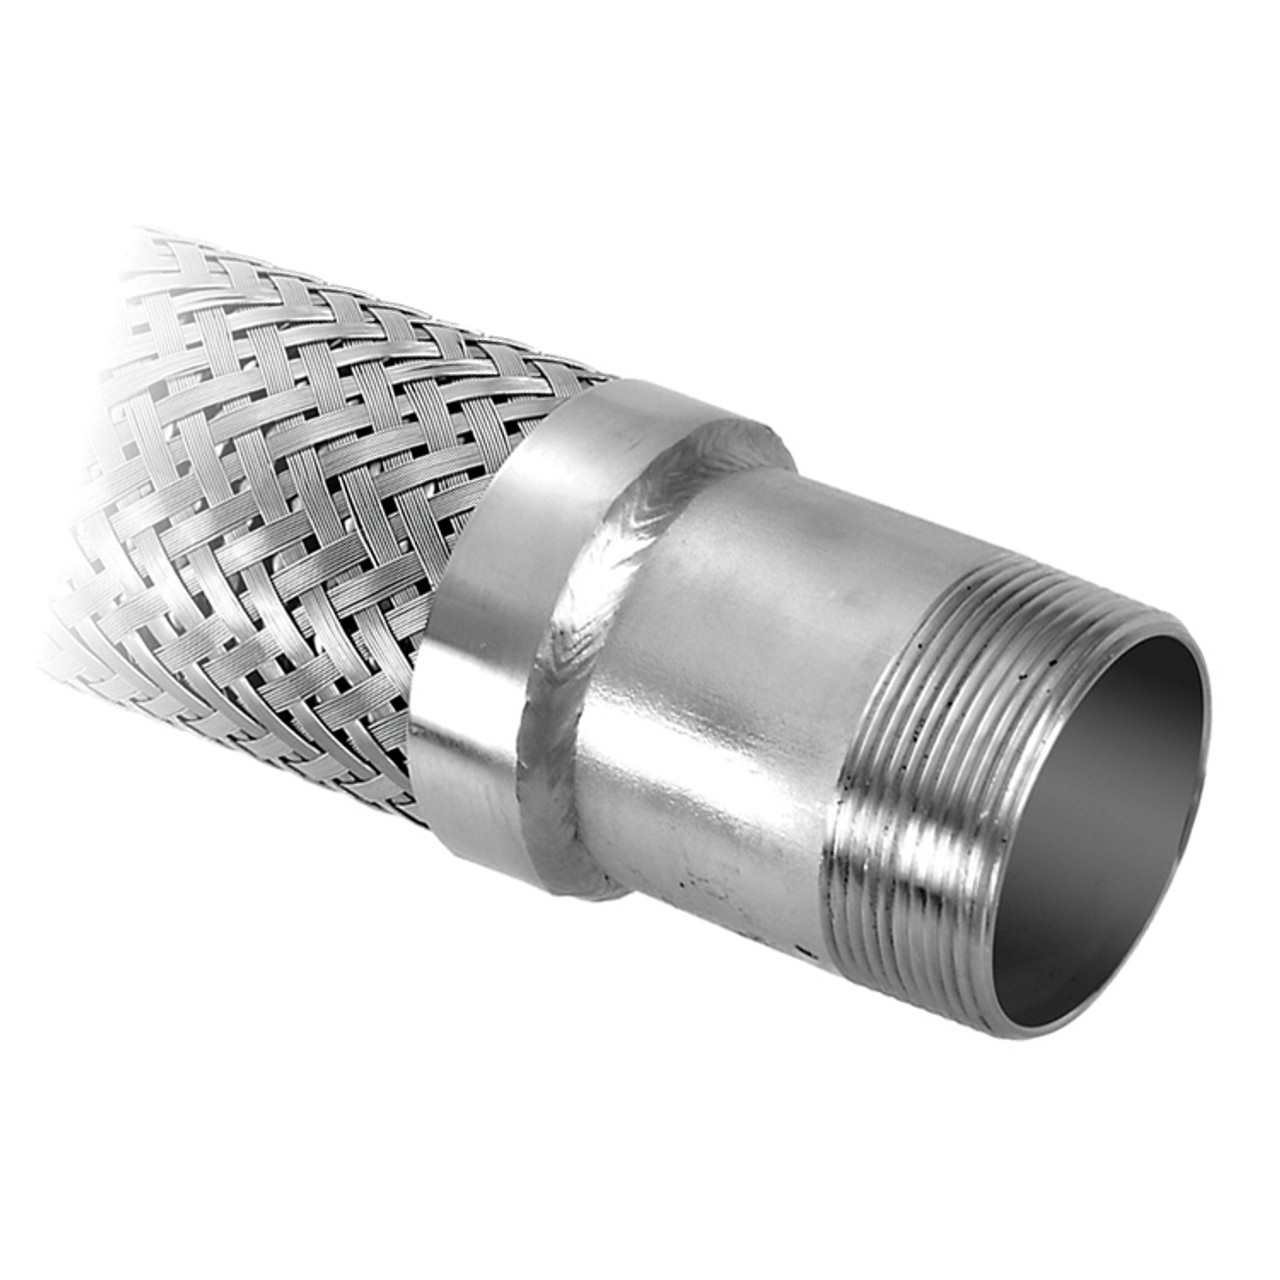 1-1/2 x 1-1/2" x 12" Stainless Steel Hose Assembly CSA w/ Male Plain NPT Ends   G521CSA-150MM-12